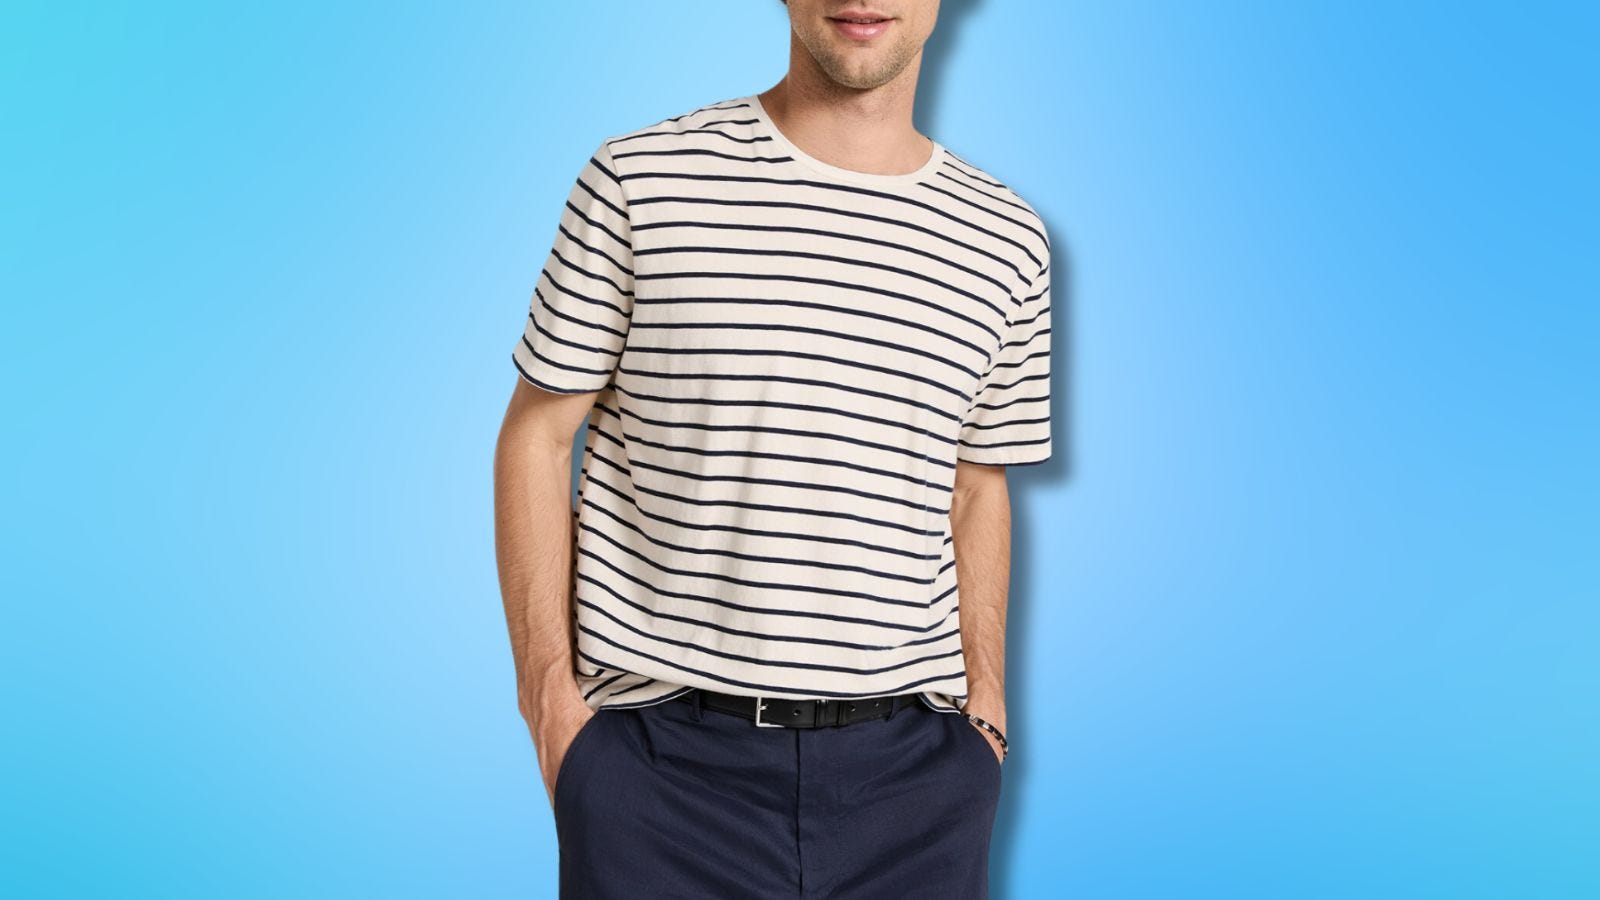 close-up of a man wearing a white and navy striped t-shirt with his hands in the pockets of his dark trousers